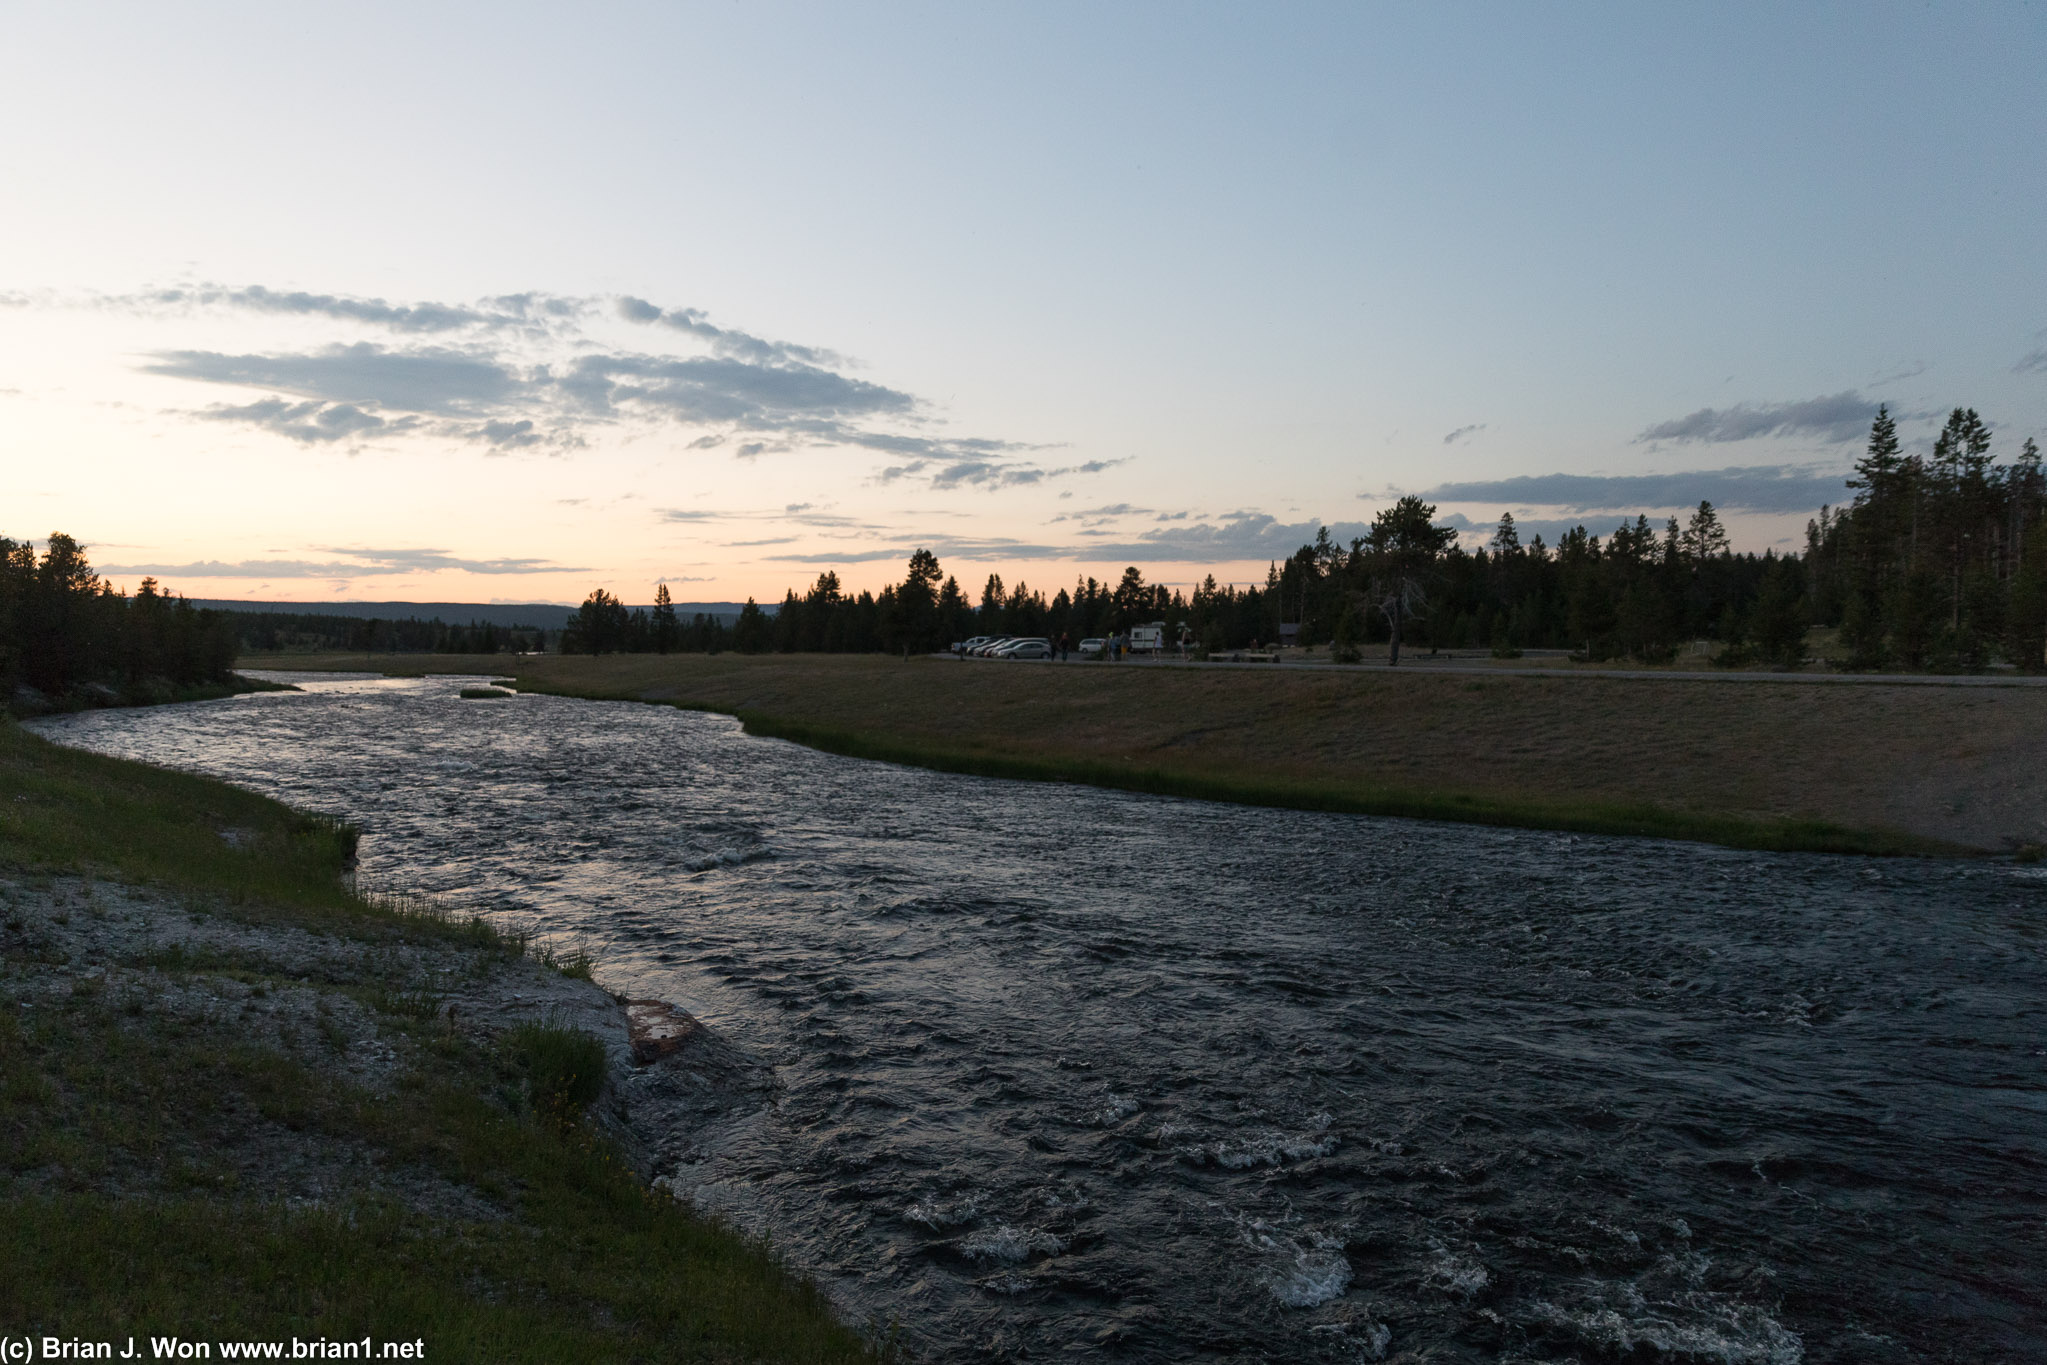 The Firehole River as it passes by Excelsior Geyser Crater at sunset.